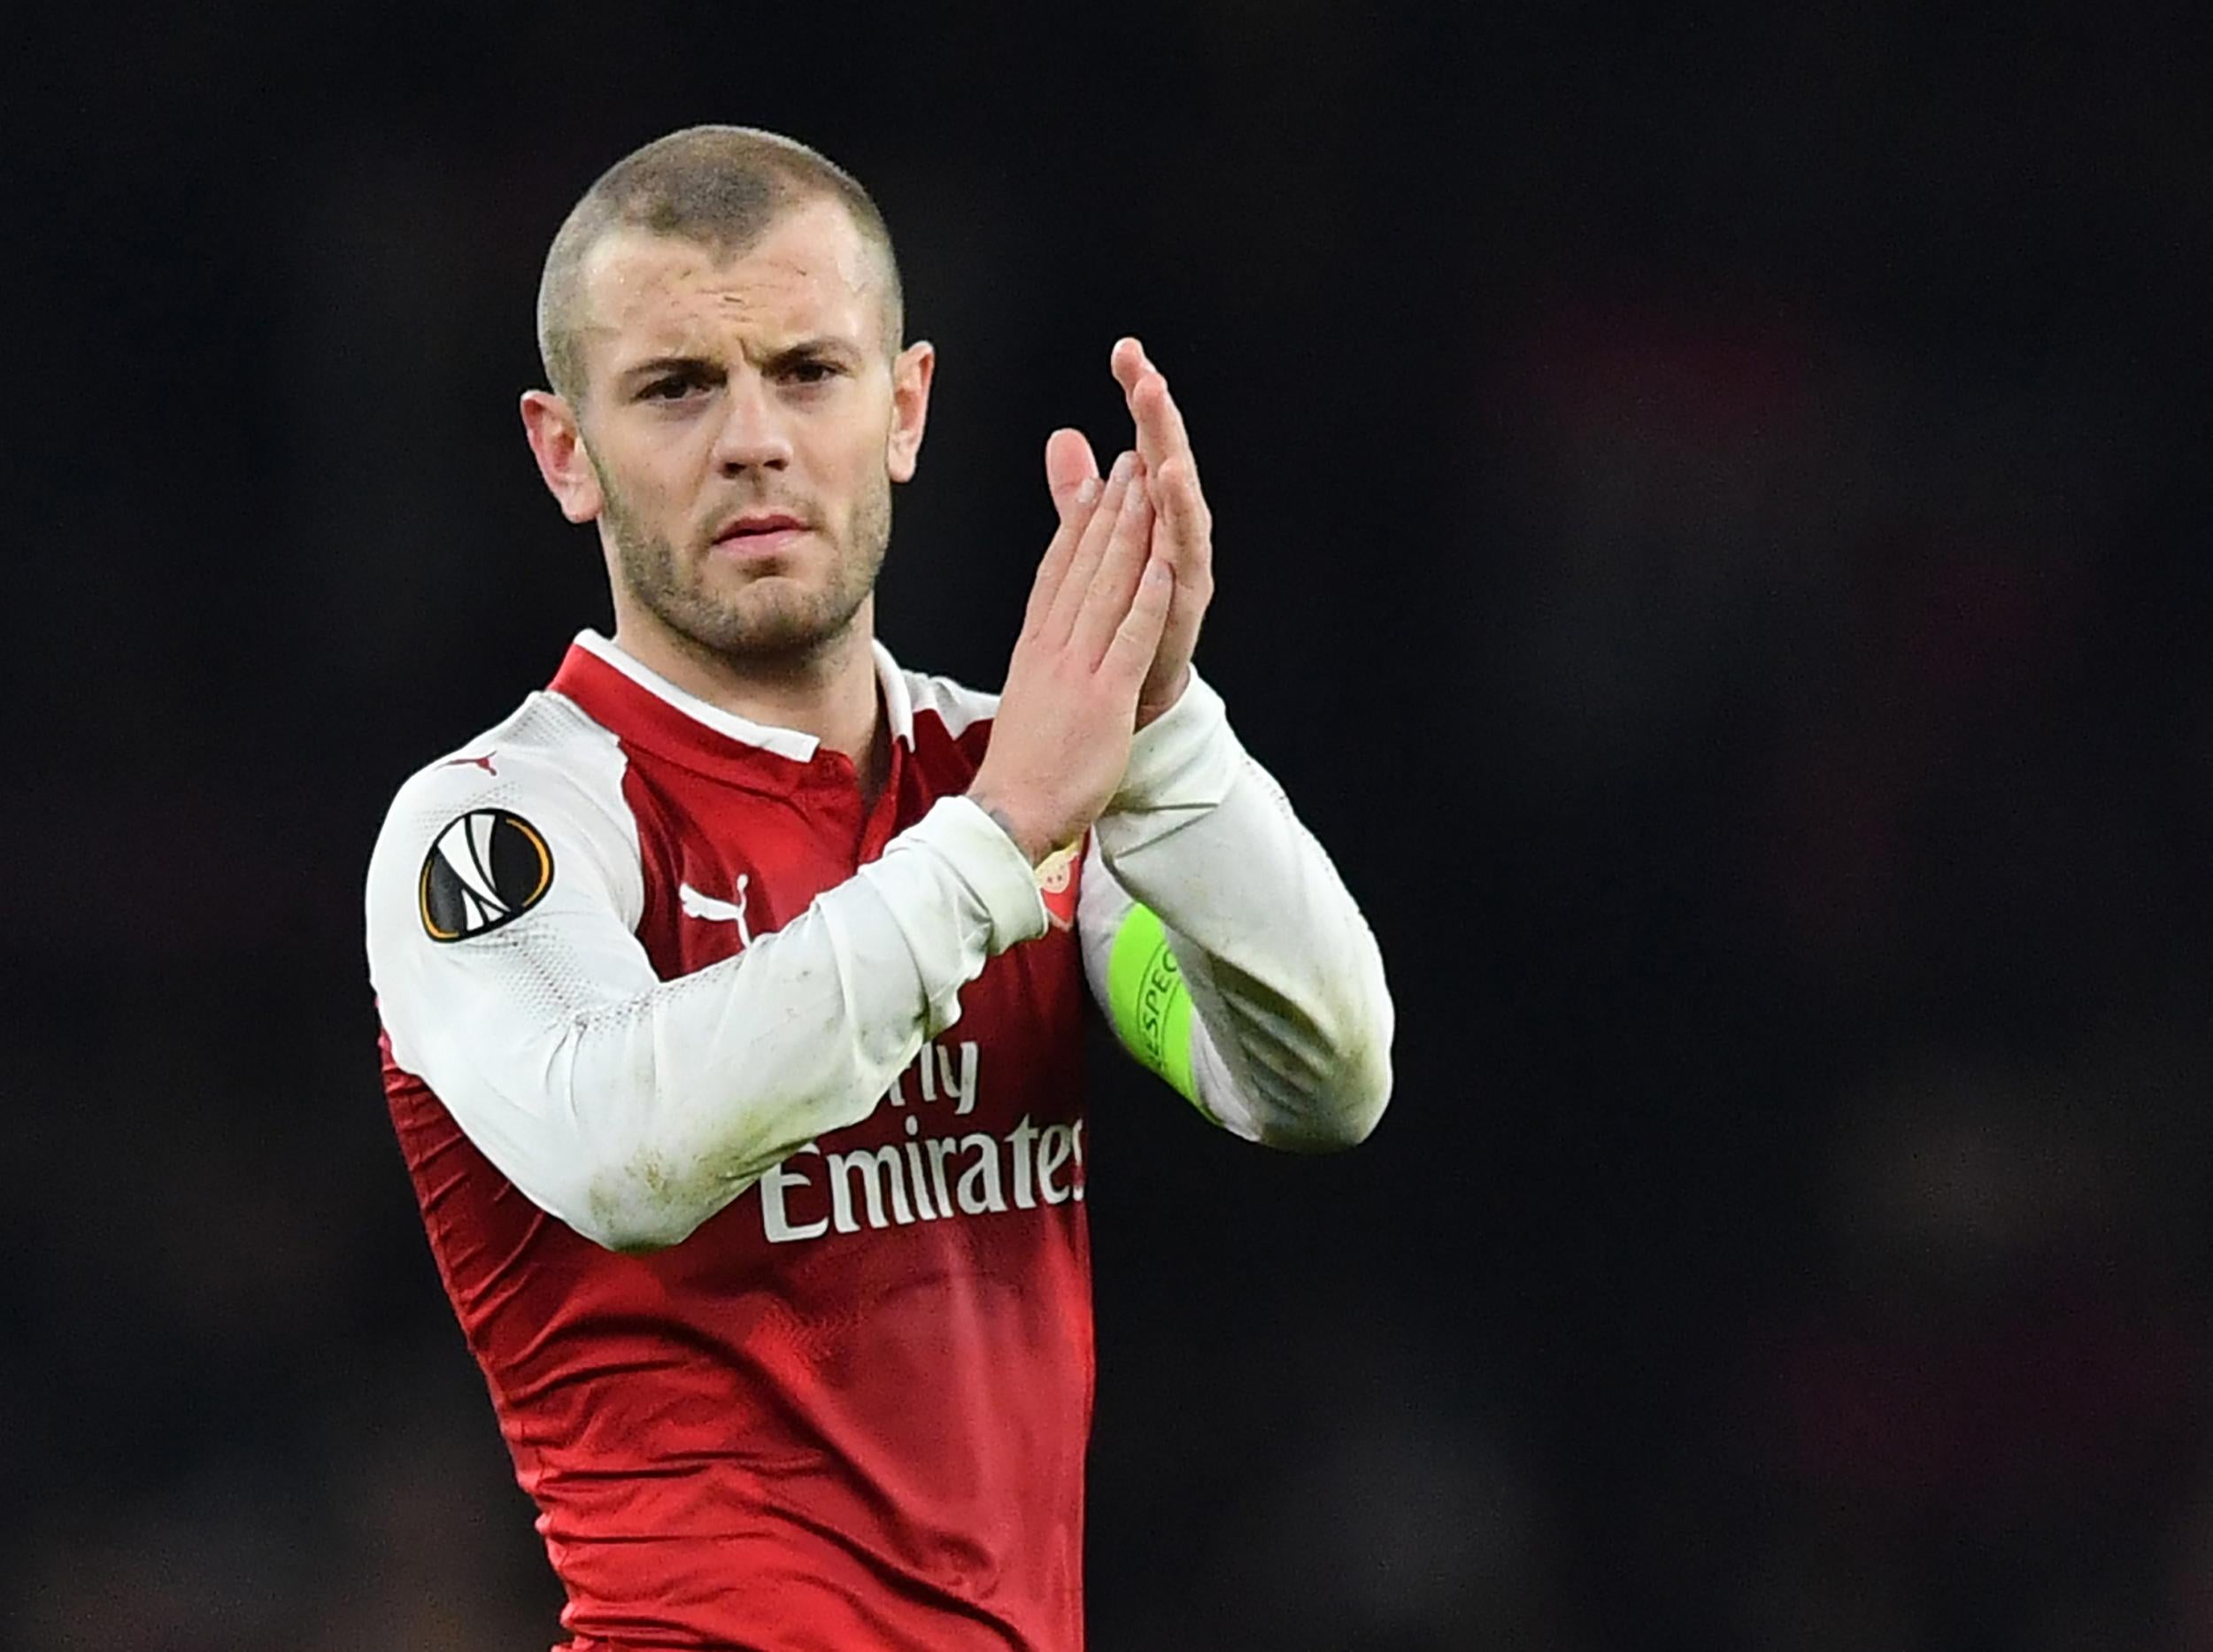 Jack Wilshere's Arsenal future remains up in the air